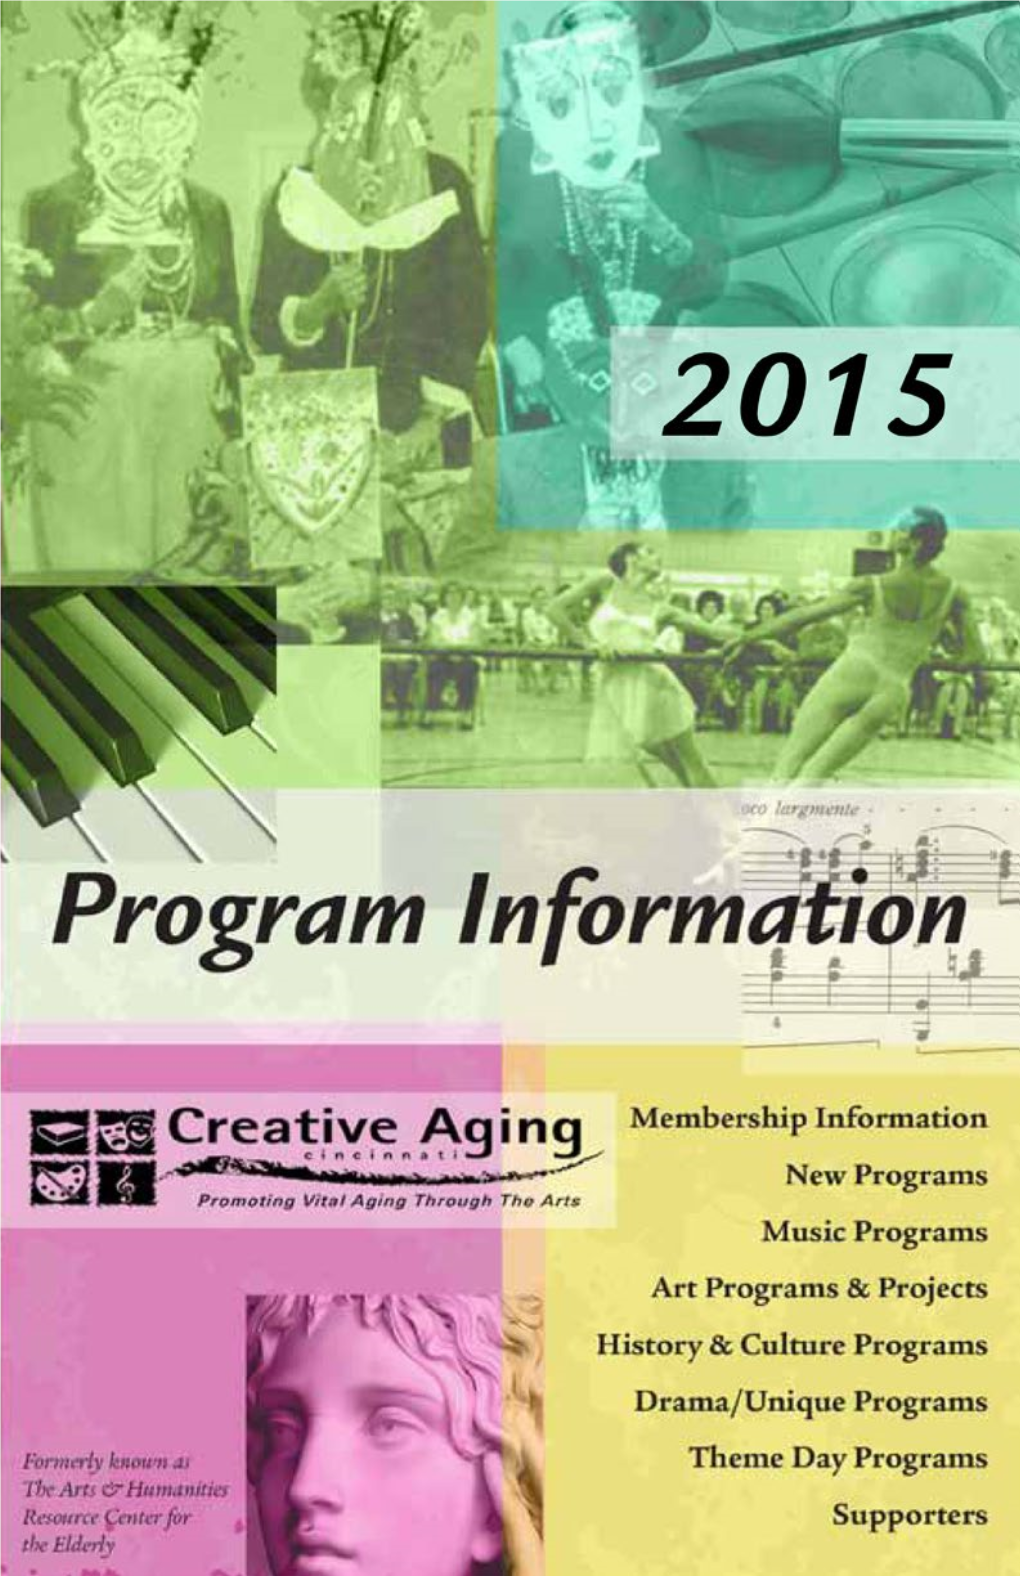 Creative Aging Proudly Collaborates with the Following Organizations